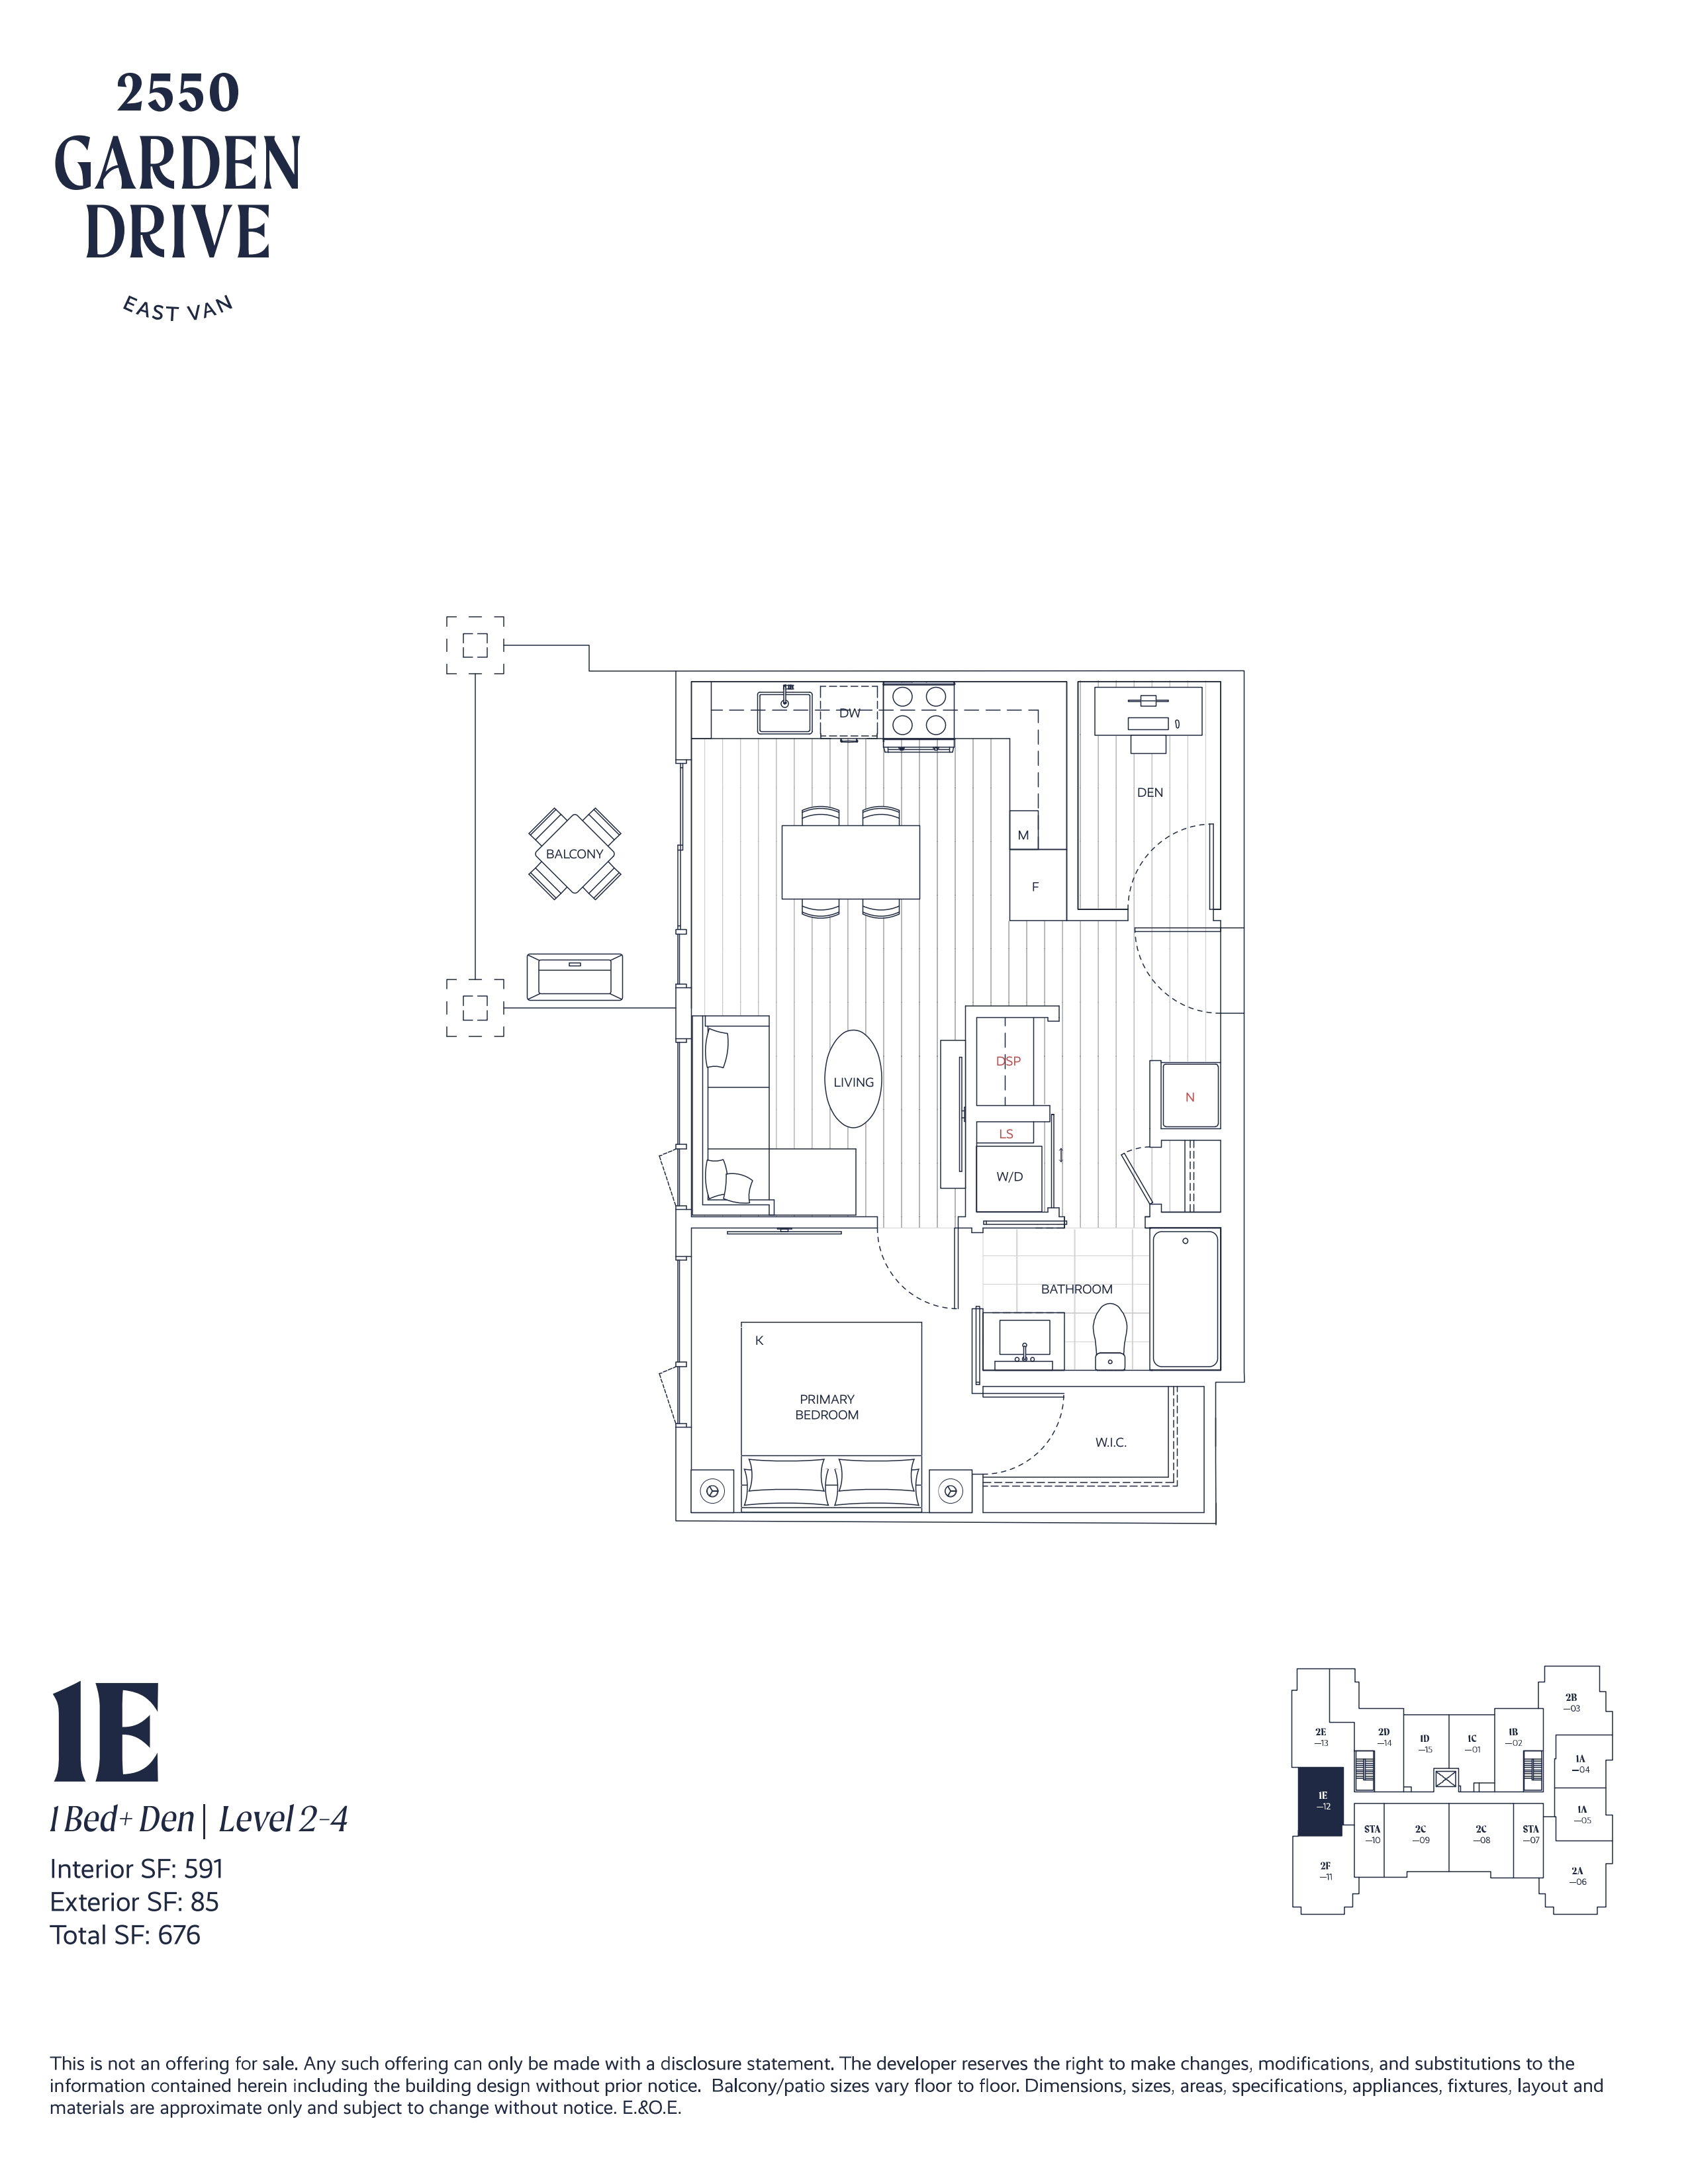 1E Floor Plan of 2550 Garden Drive Condos with undefined beds